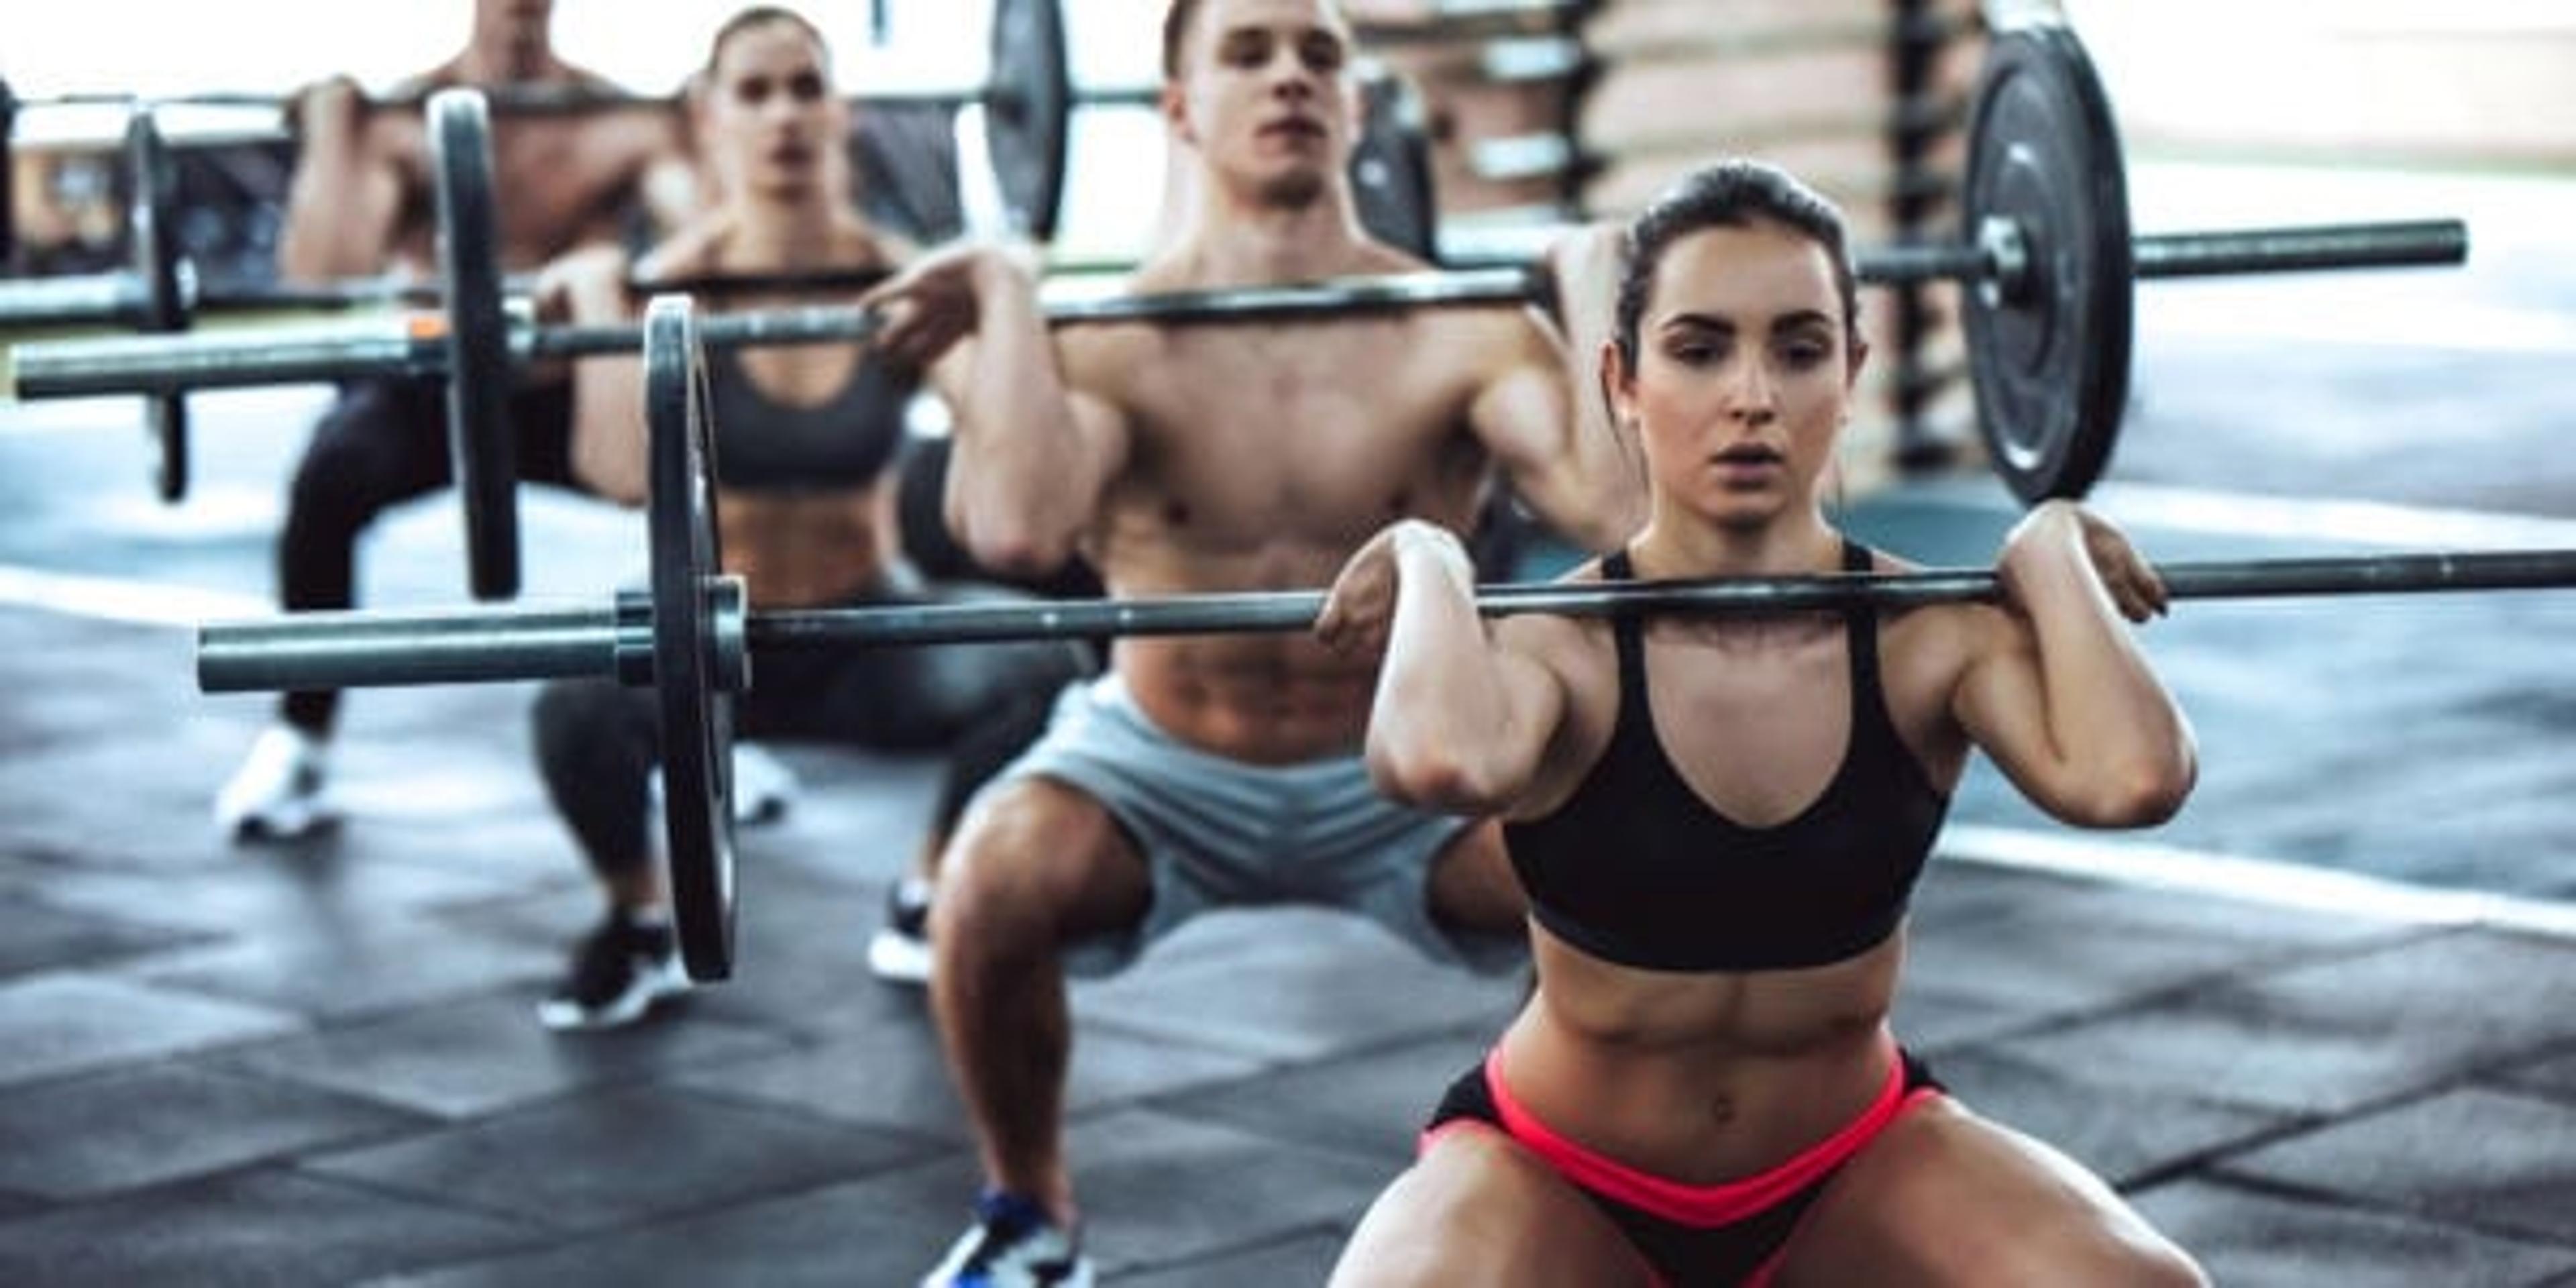 Group of people training in a gym squatting with barbells